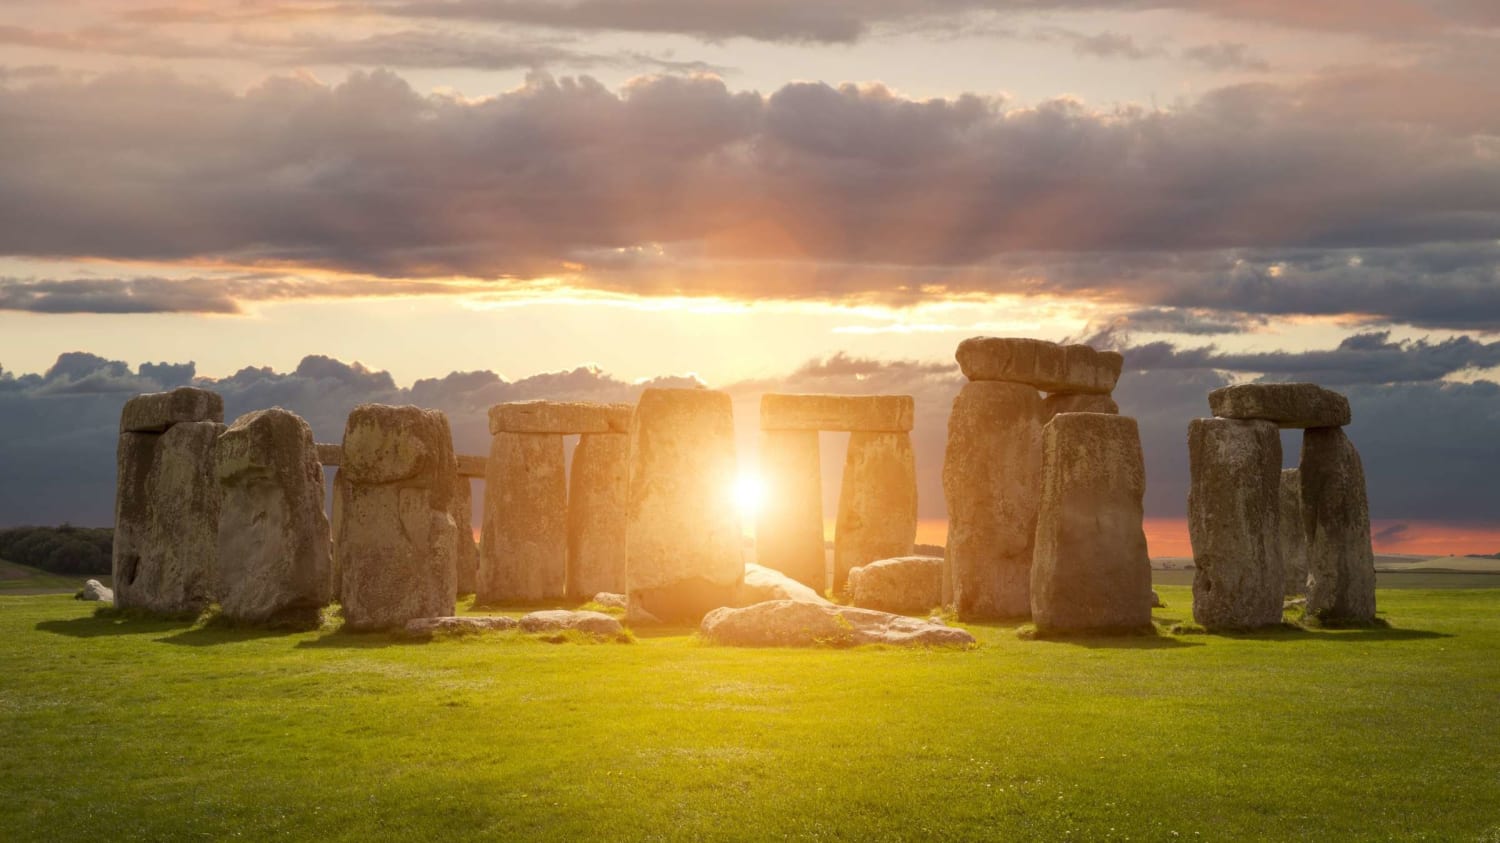 For the First Time Ever, You Can Watch the Summer Solstice at Stonehenge via Livestream